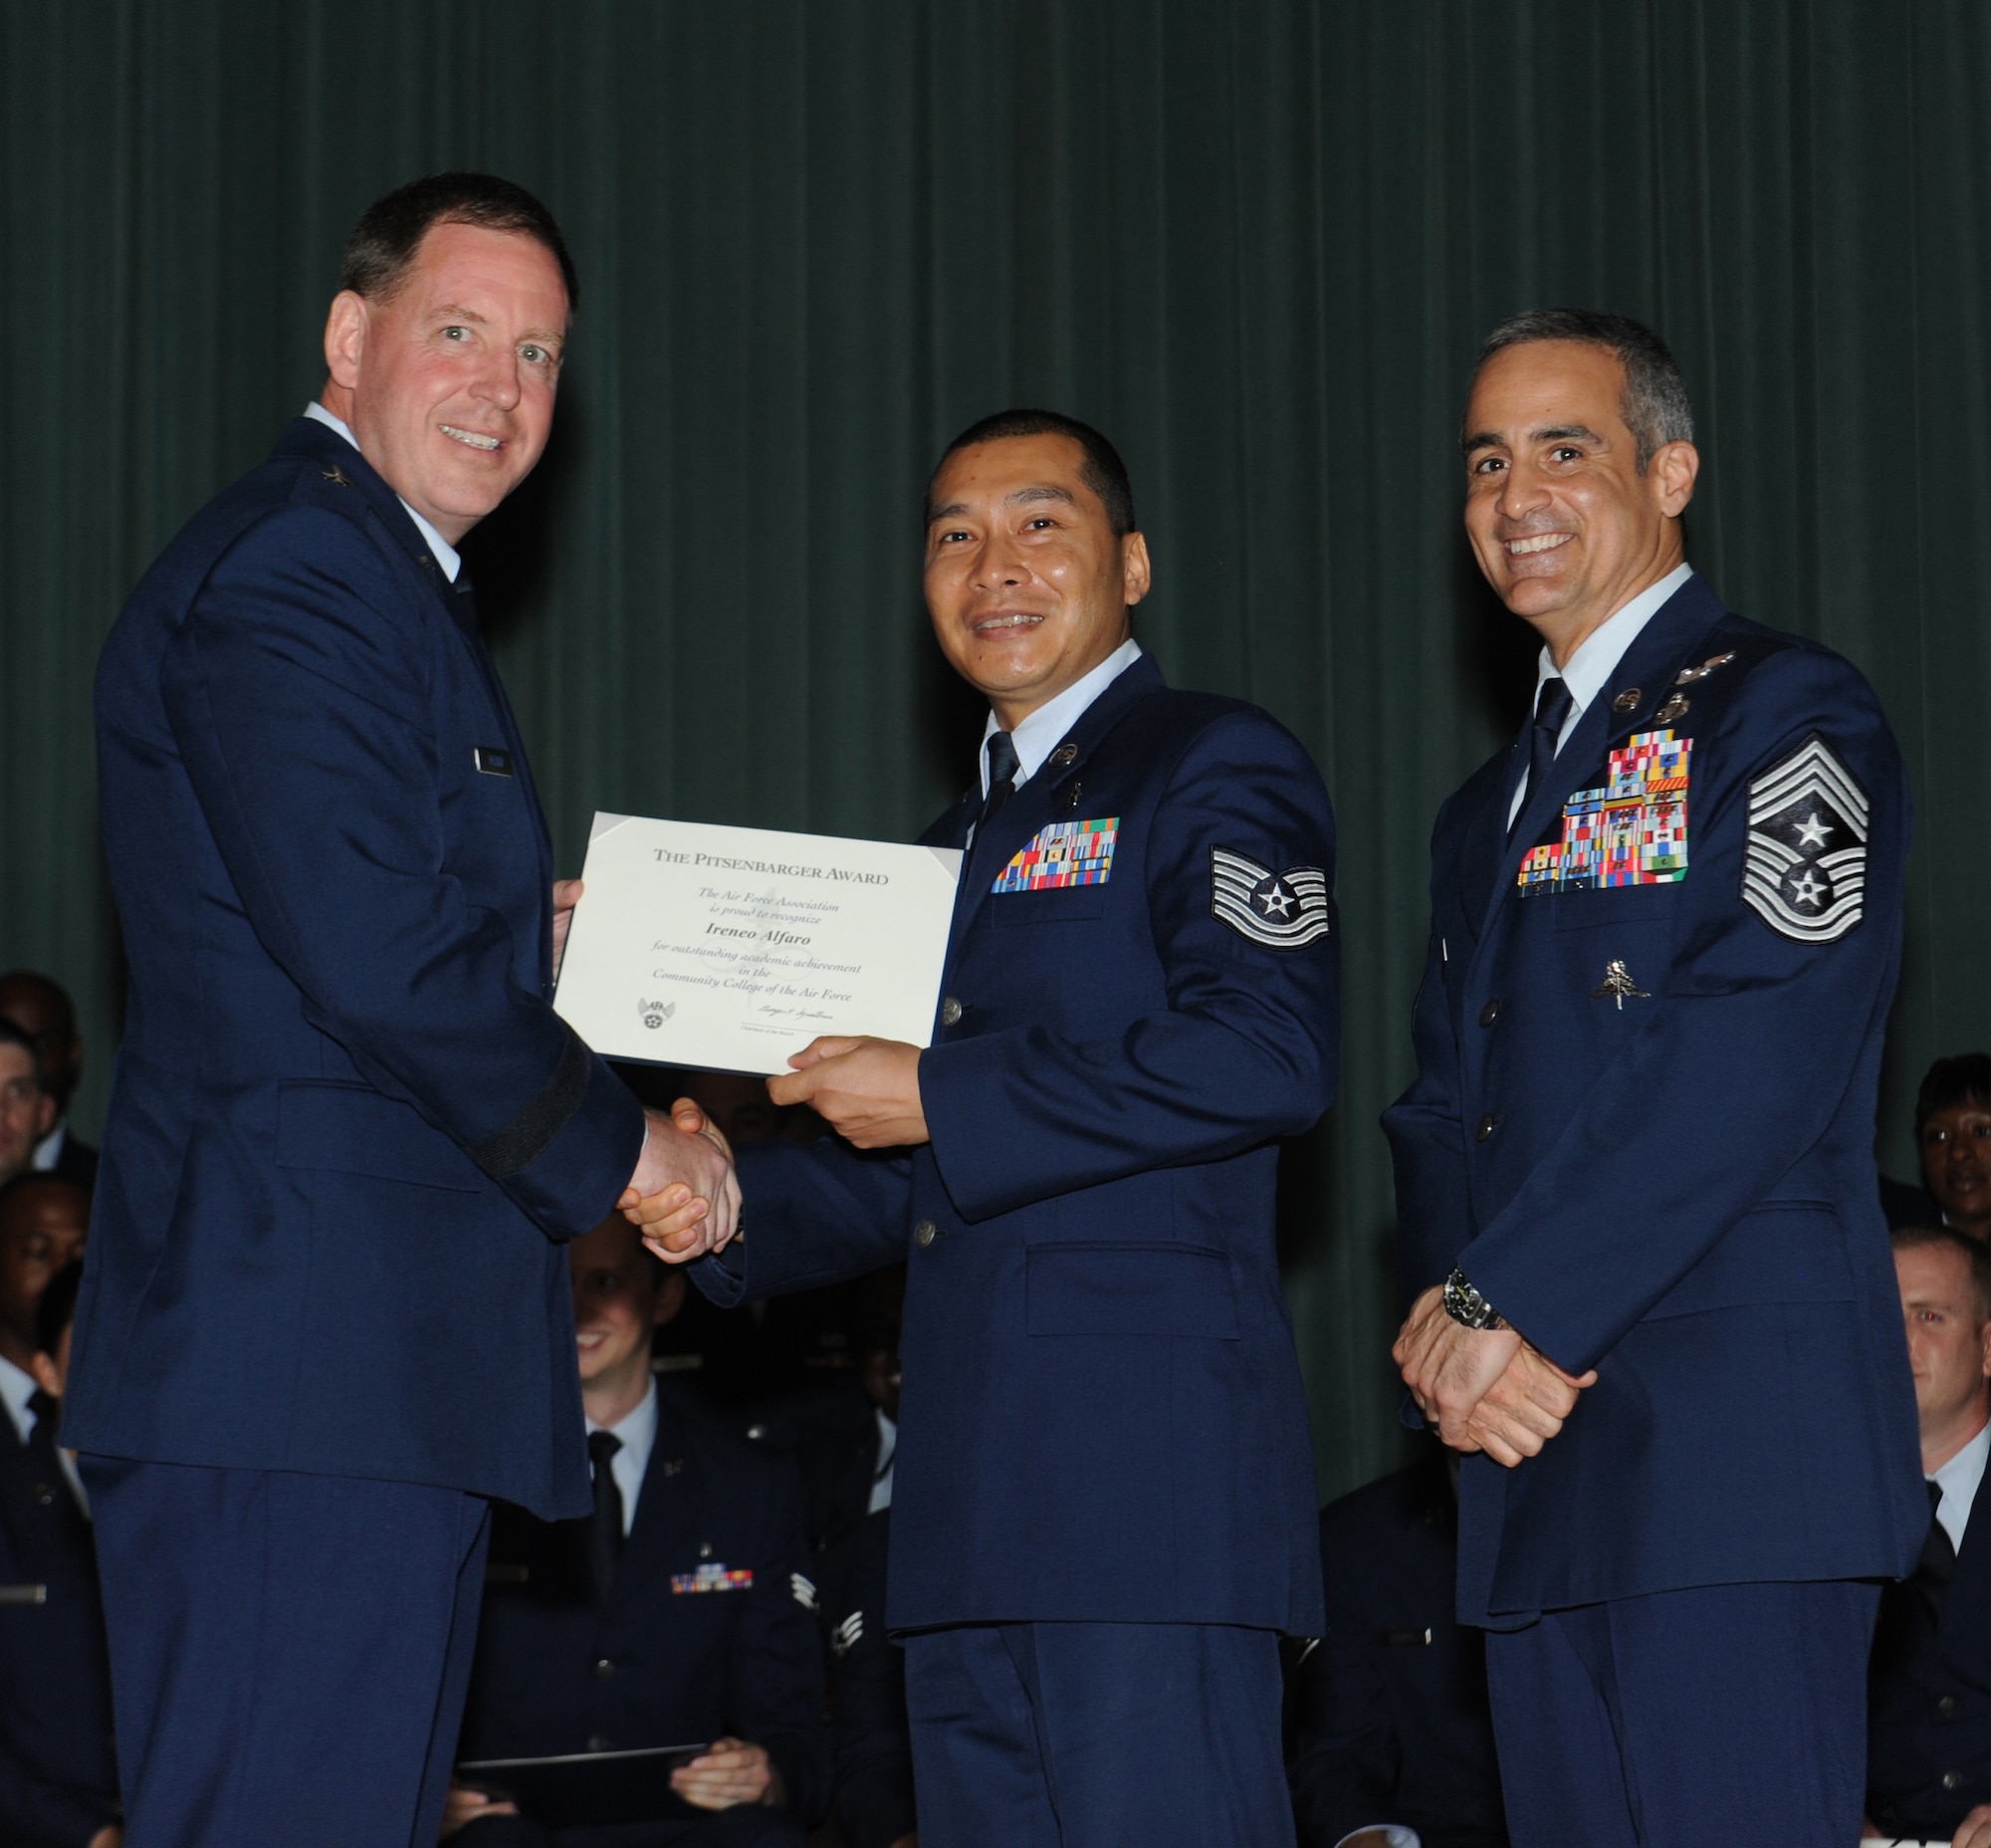 U.S. Air Force Tech. Sgt. Ireneo Alfaro, 18th Aerospace Medicine Squadron NCO in charge of community health element, receives the Pitsenbarger Award during a Community College of the Air Force graduation ceremony at the Keystone Theater on Kadena Air Base, Japan, May 22, 2013. A CCAF degree, requiring at least 64 college credit hours, is essential for U.S. Air Force Airmen in order to progress through the enlisted ranks and further their careers. (U.S. Air Force photo by Airman 1st Class Malia Jenkins/Released)